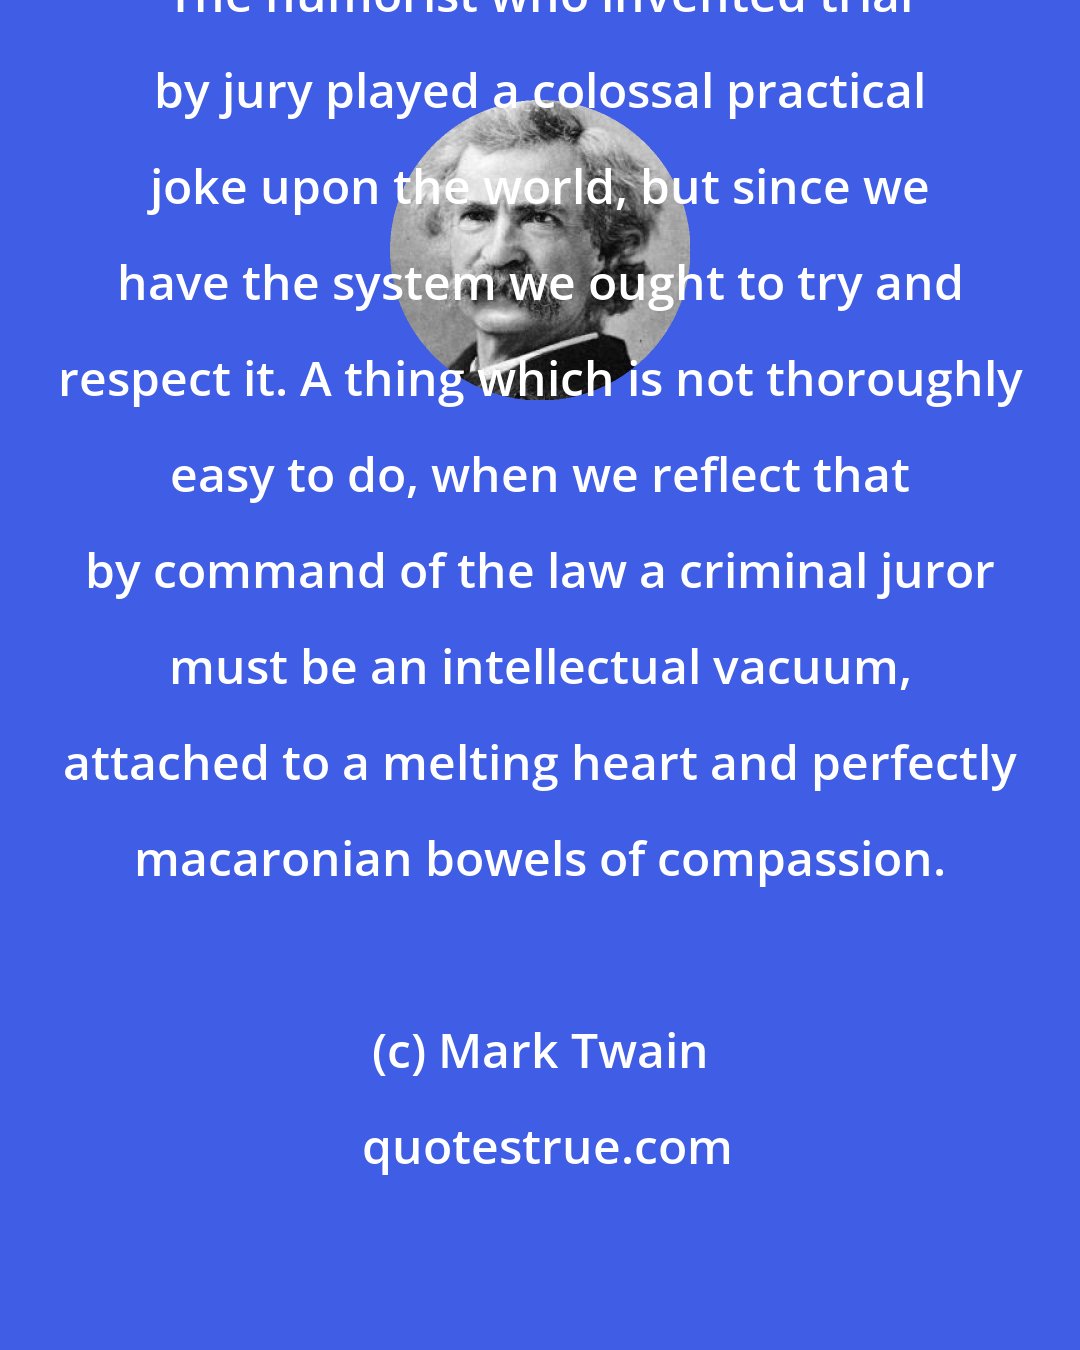 Mark Twain: The humorist who invented trial by jury played a colossal practical joke upon the world, but since we have the system we ought to try and respect it. A thing which is not thoroughly easy to do, when we reflect that by command of the law a criminal juror must be an intellectual vacuum, attached to a melting heart and perfectly macaronian bowels of compassion.